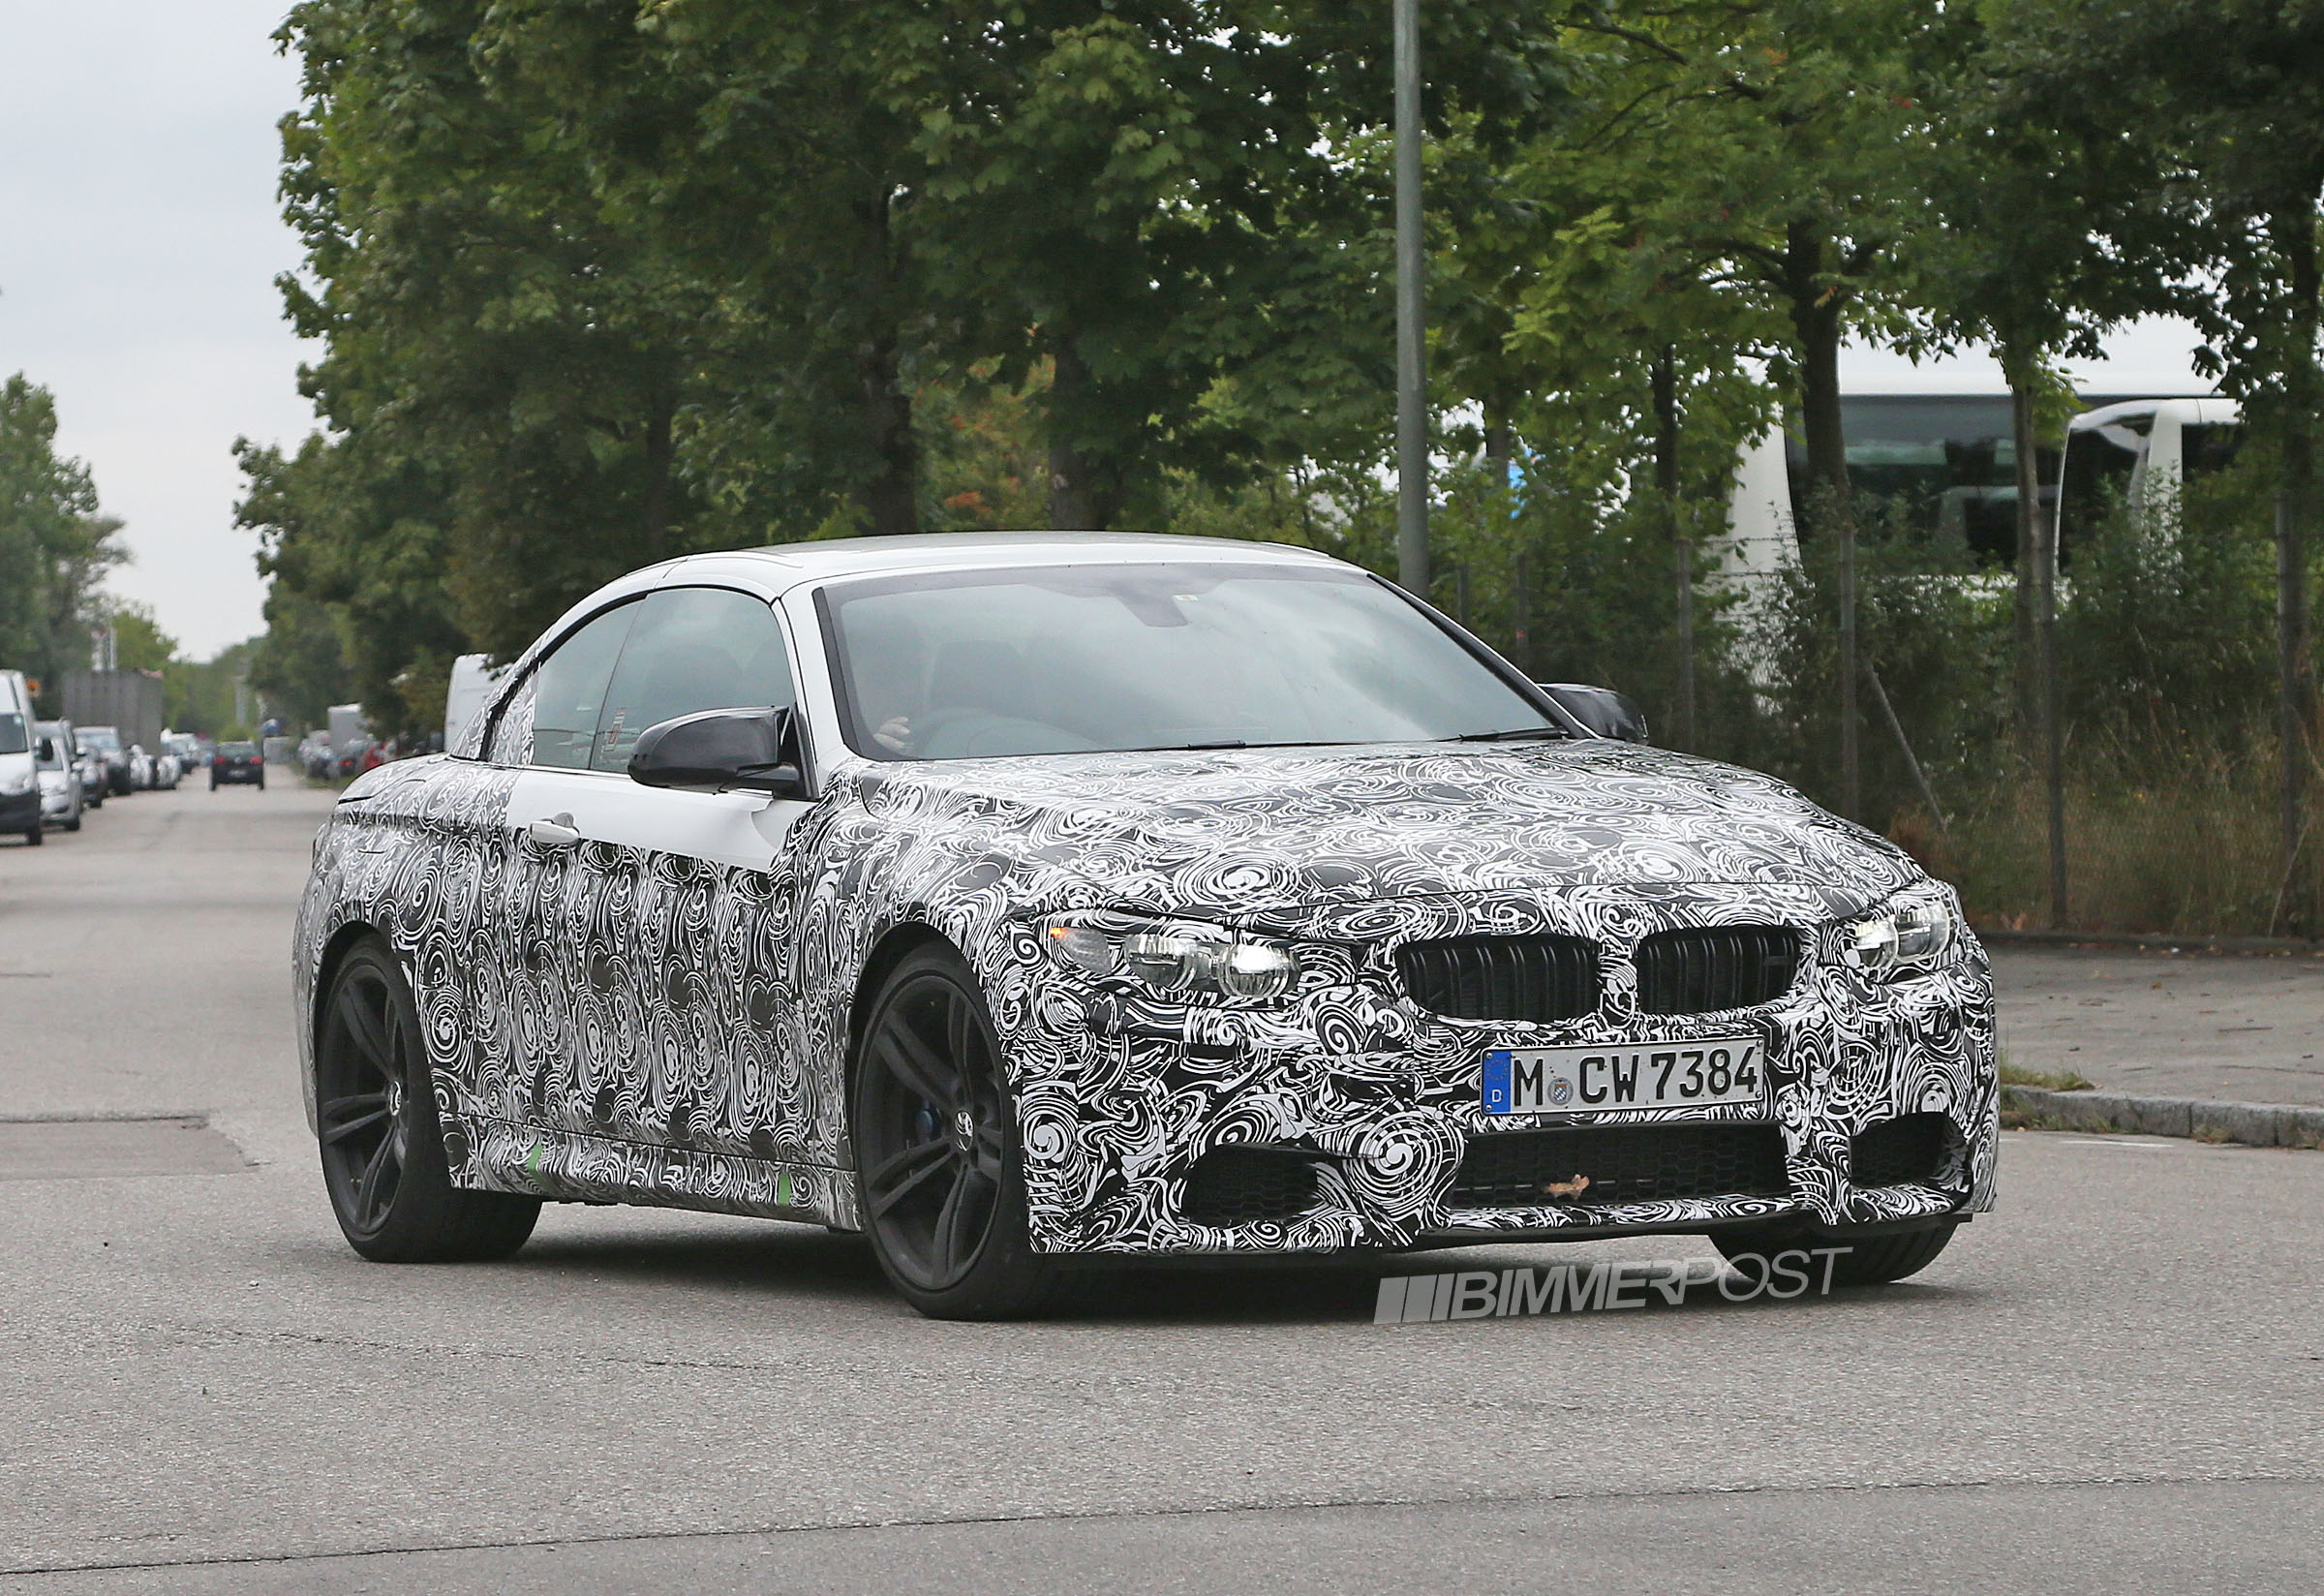 Bmw m4 convertible release date #5